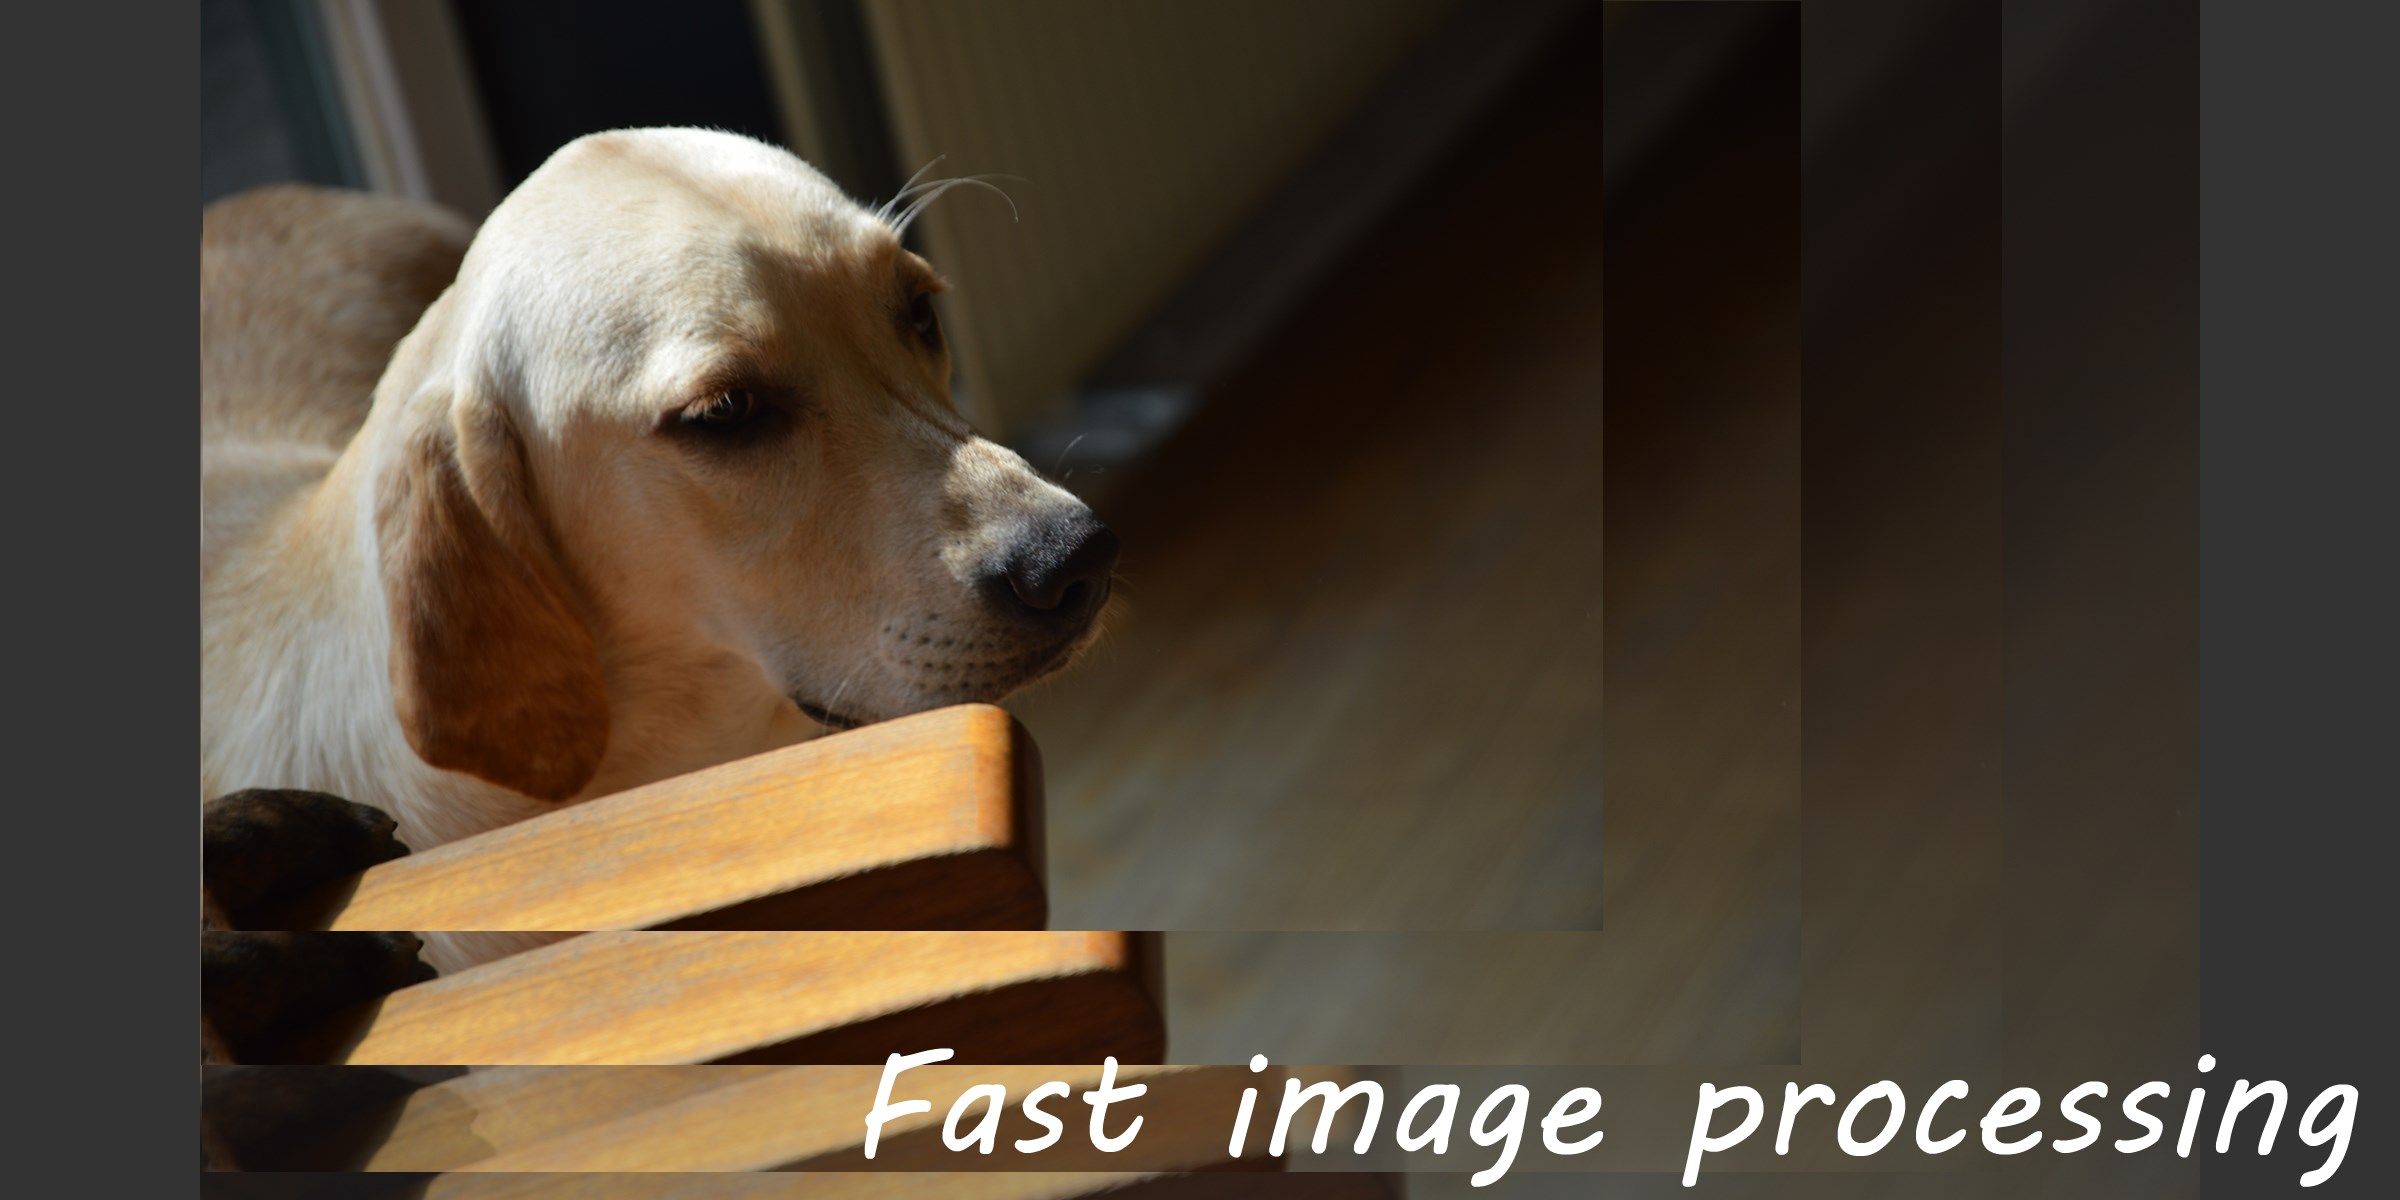 Fast image processing